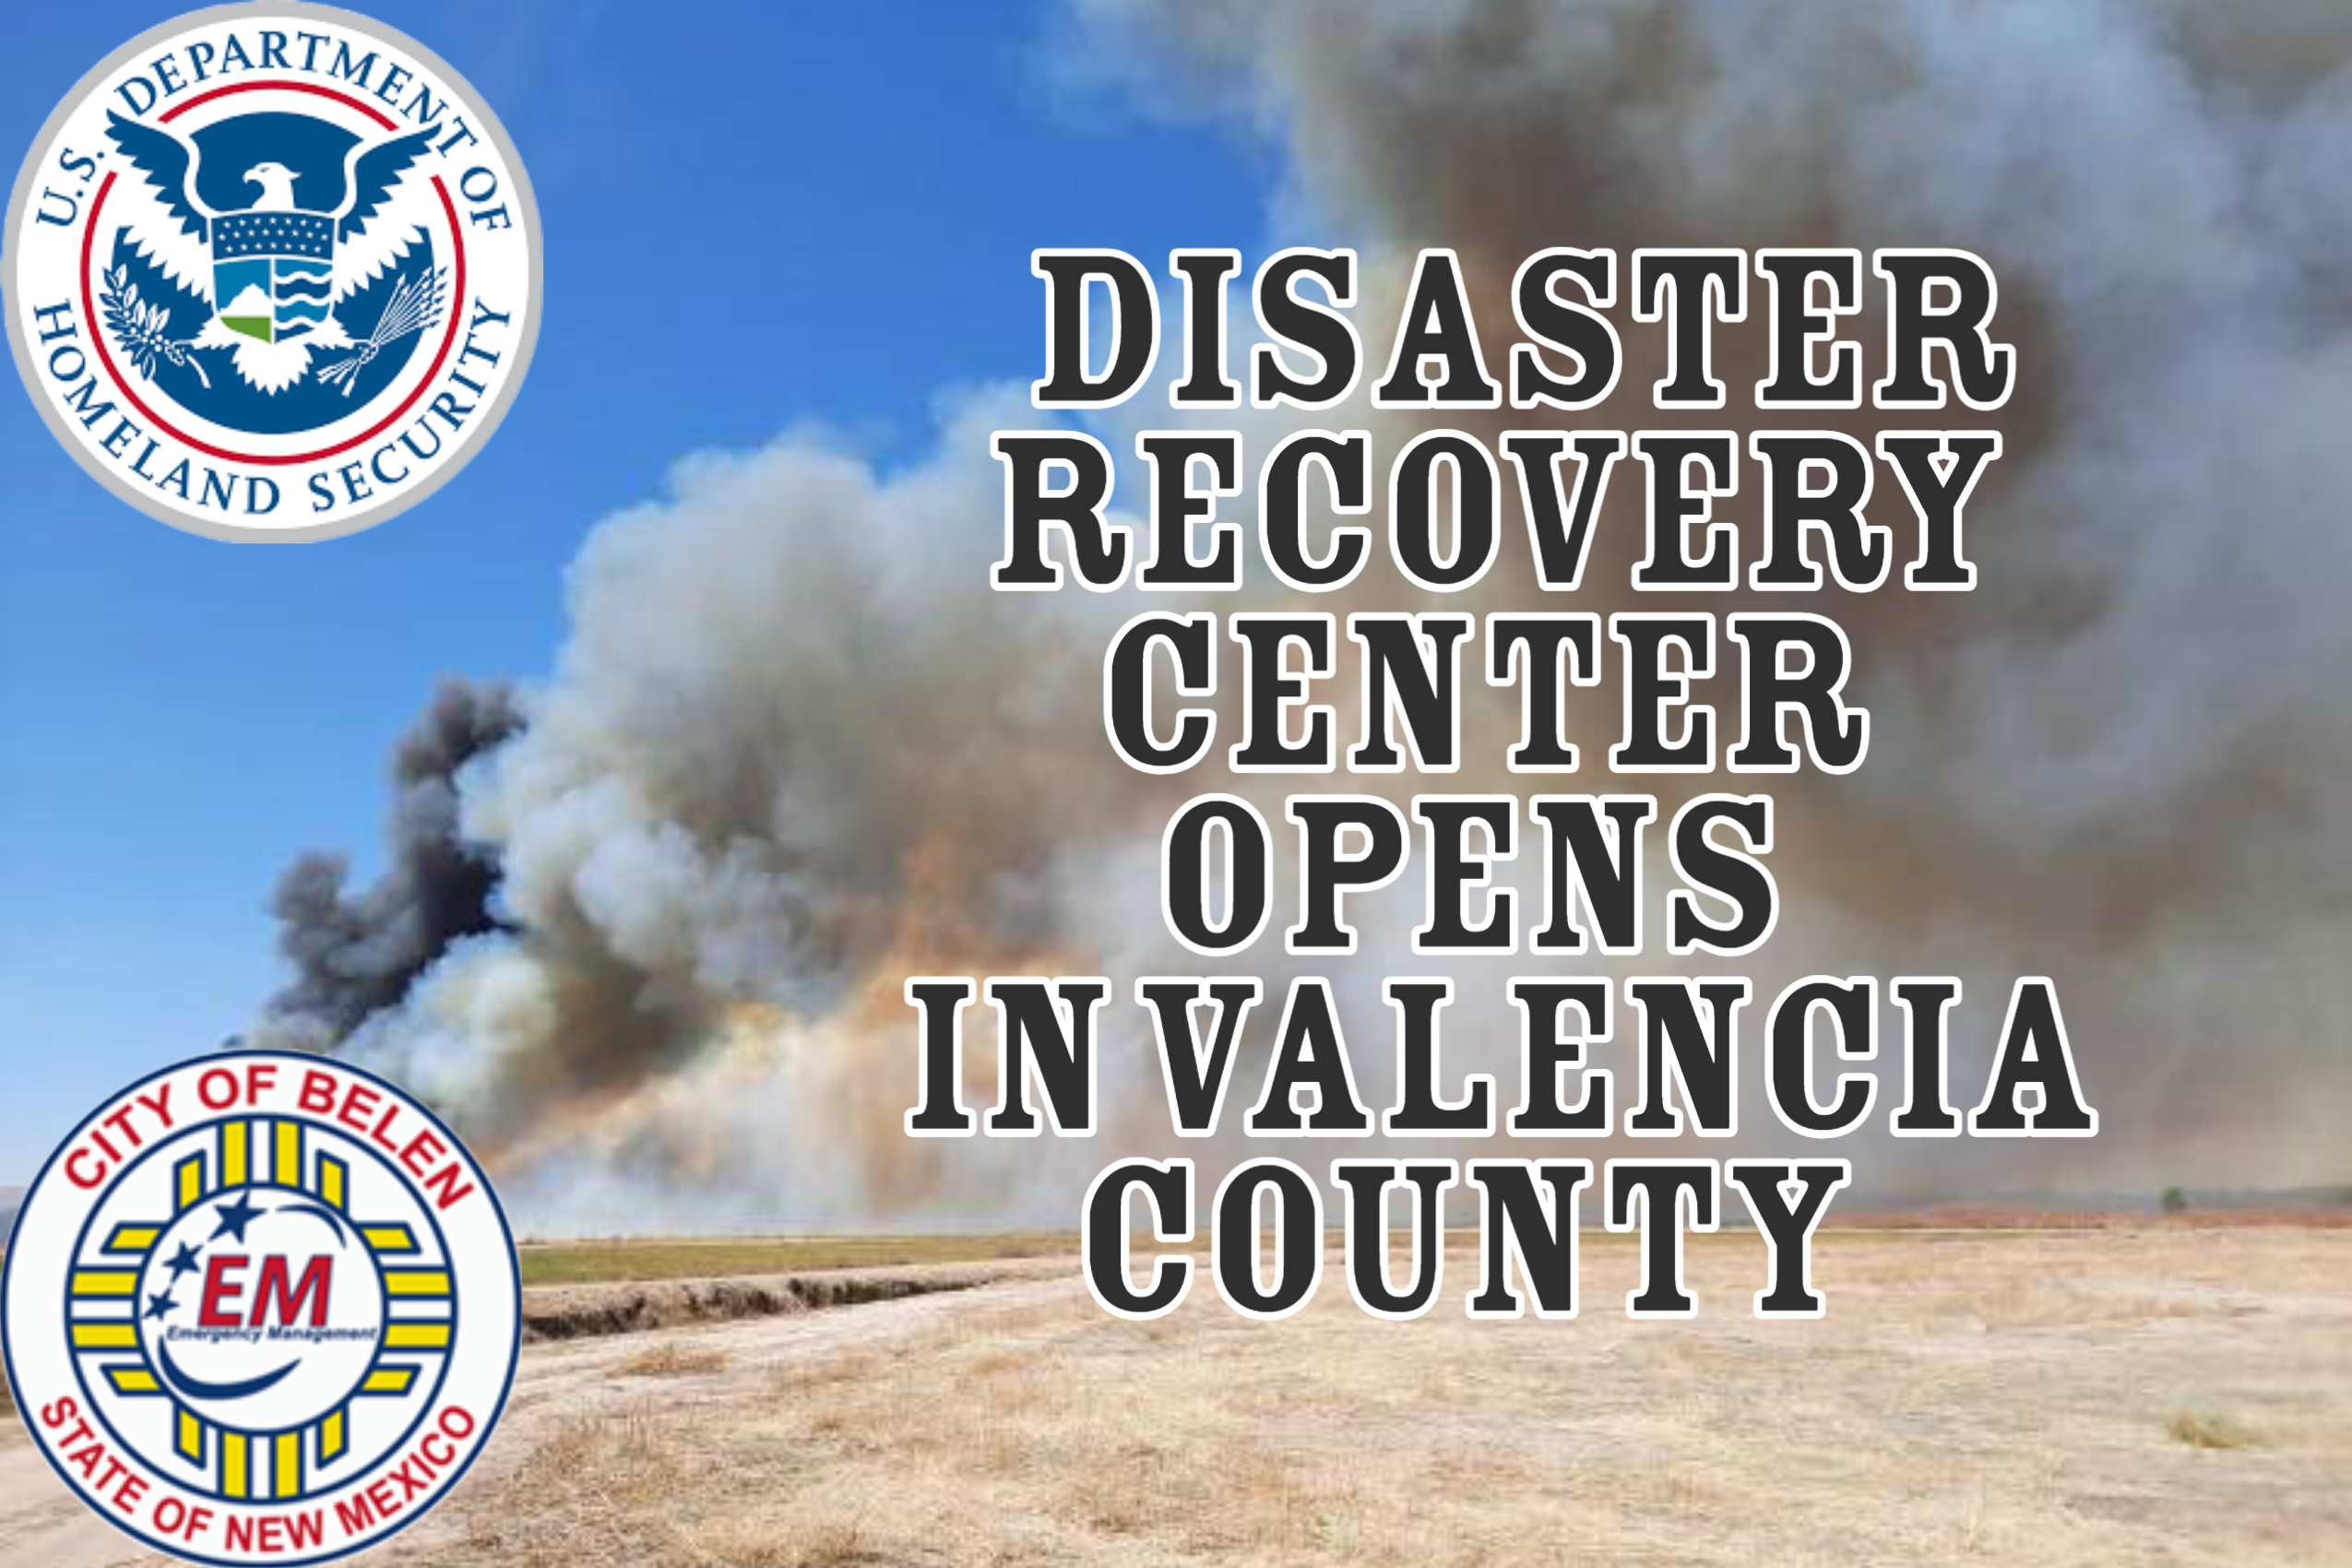 Featured image for “Disaster Recovery Center Opens in Valencia County”